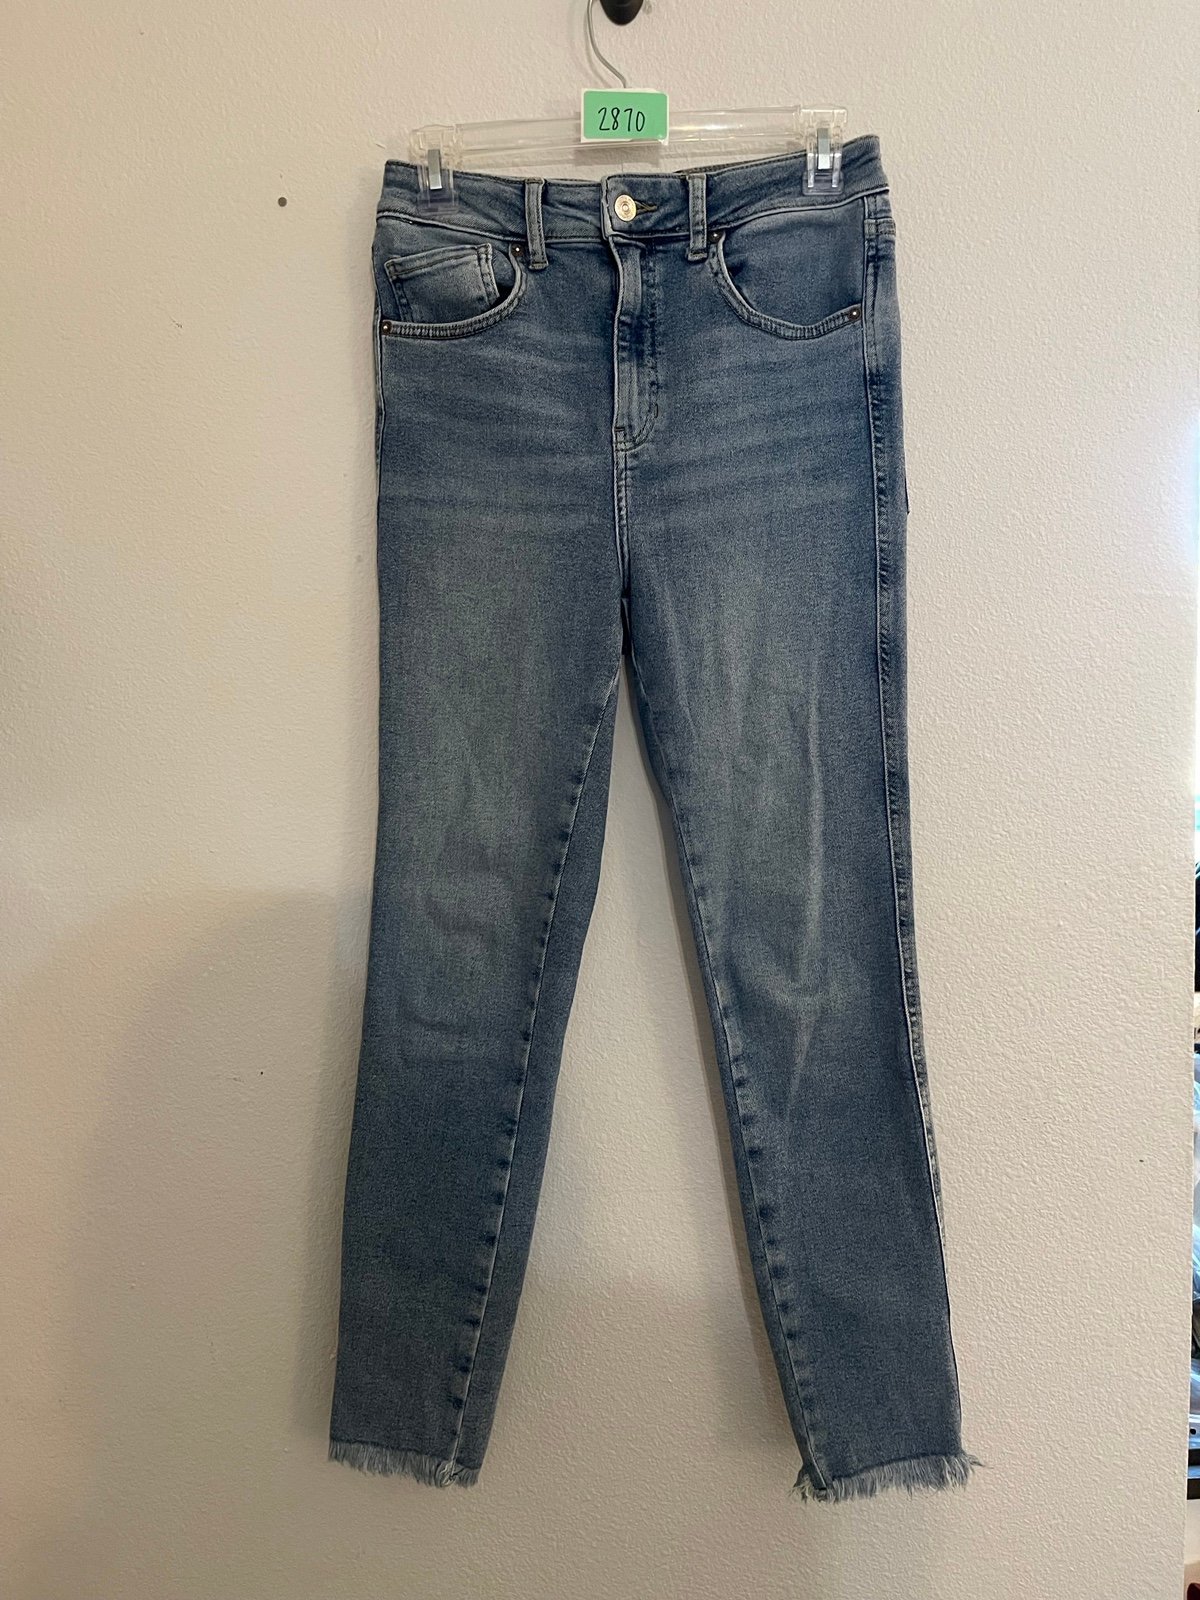 cheapest place to buy  Free People skinny jeans size 29 g3wQApfEm Counter Genuine 